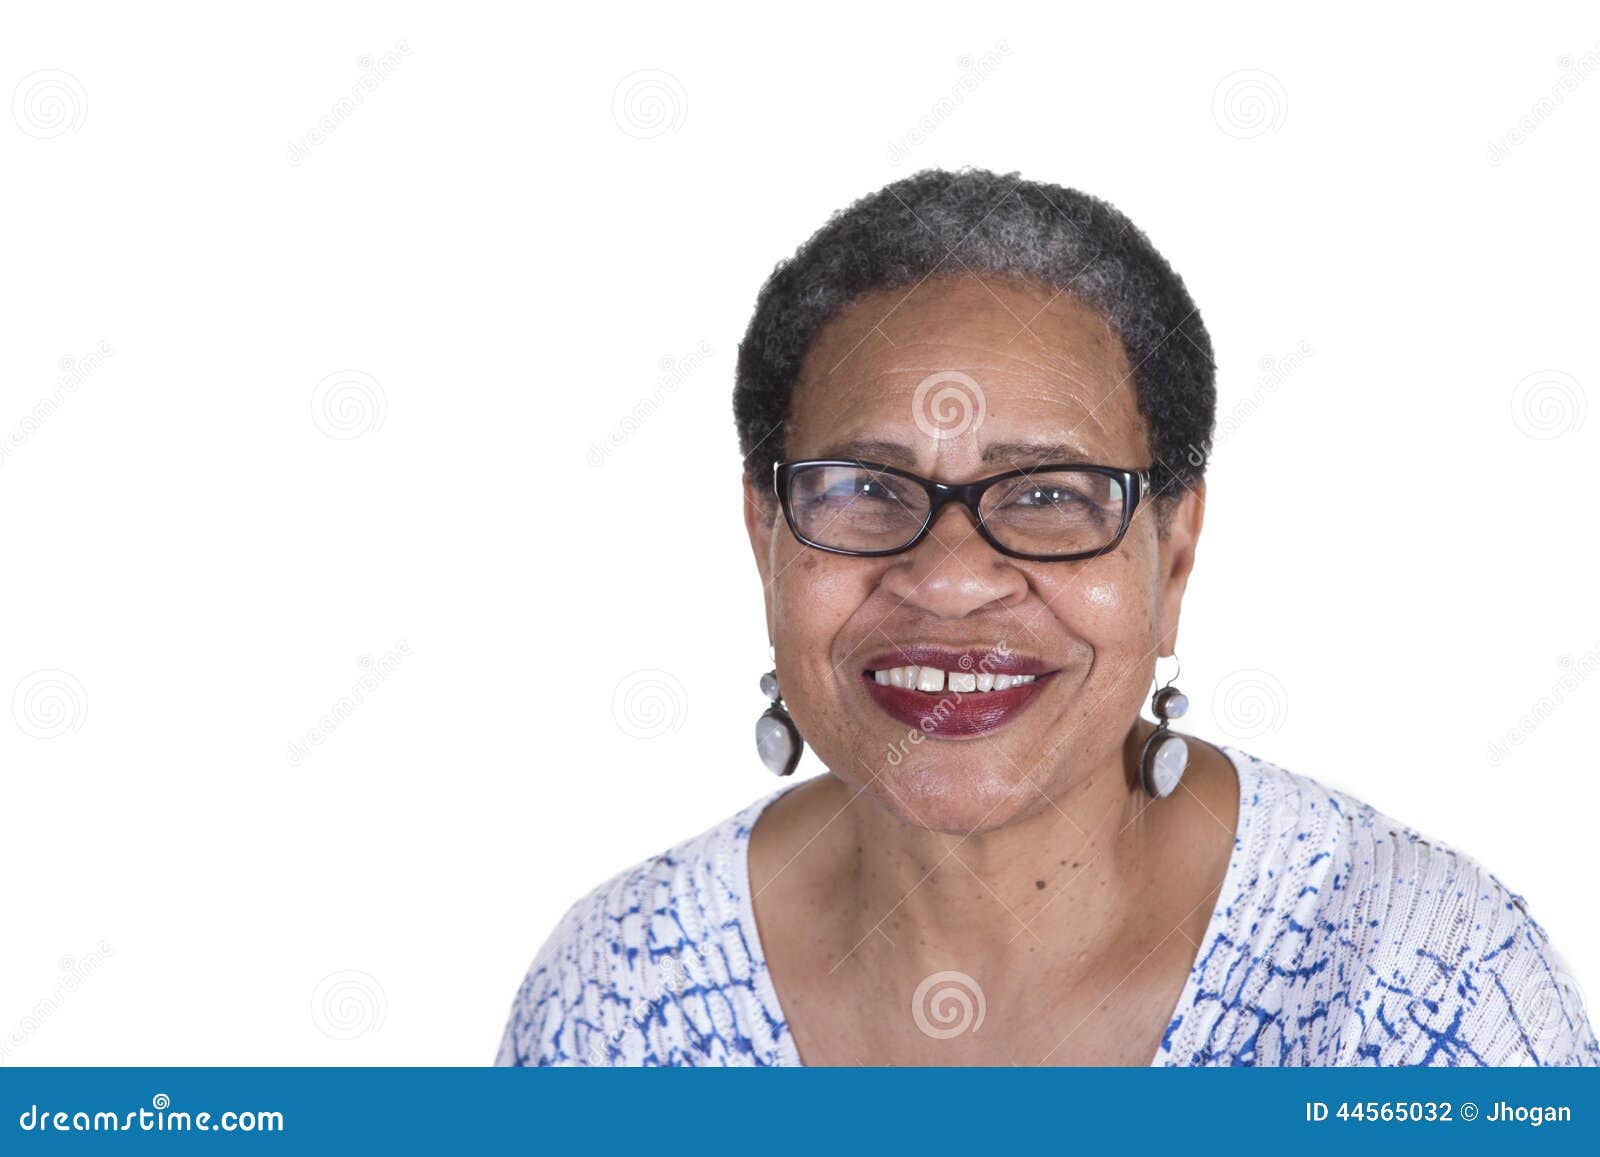 older woman with glasses